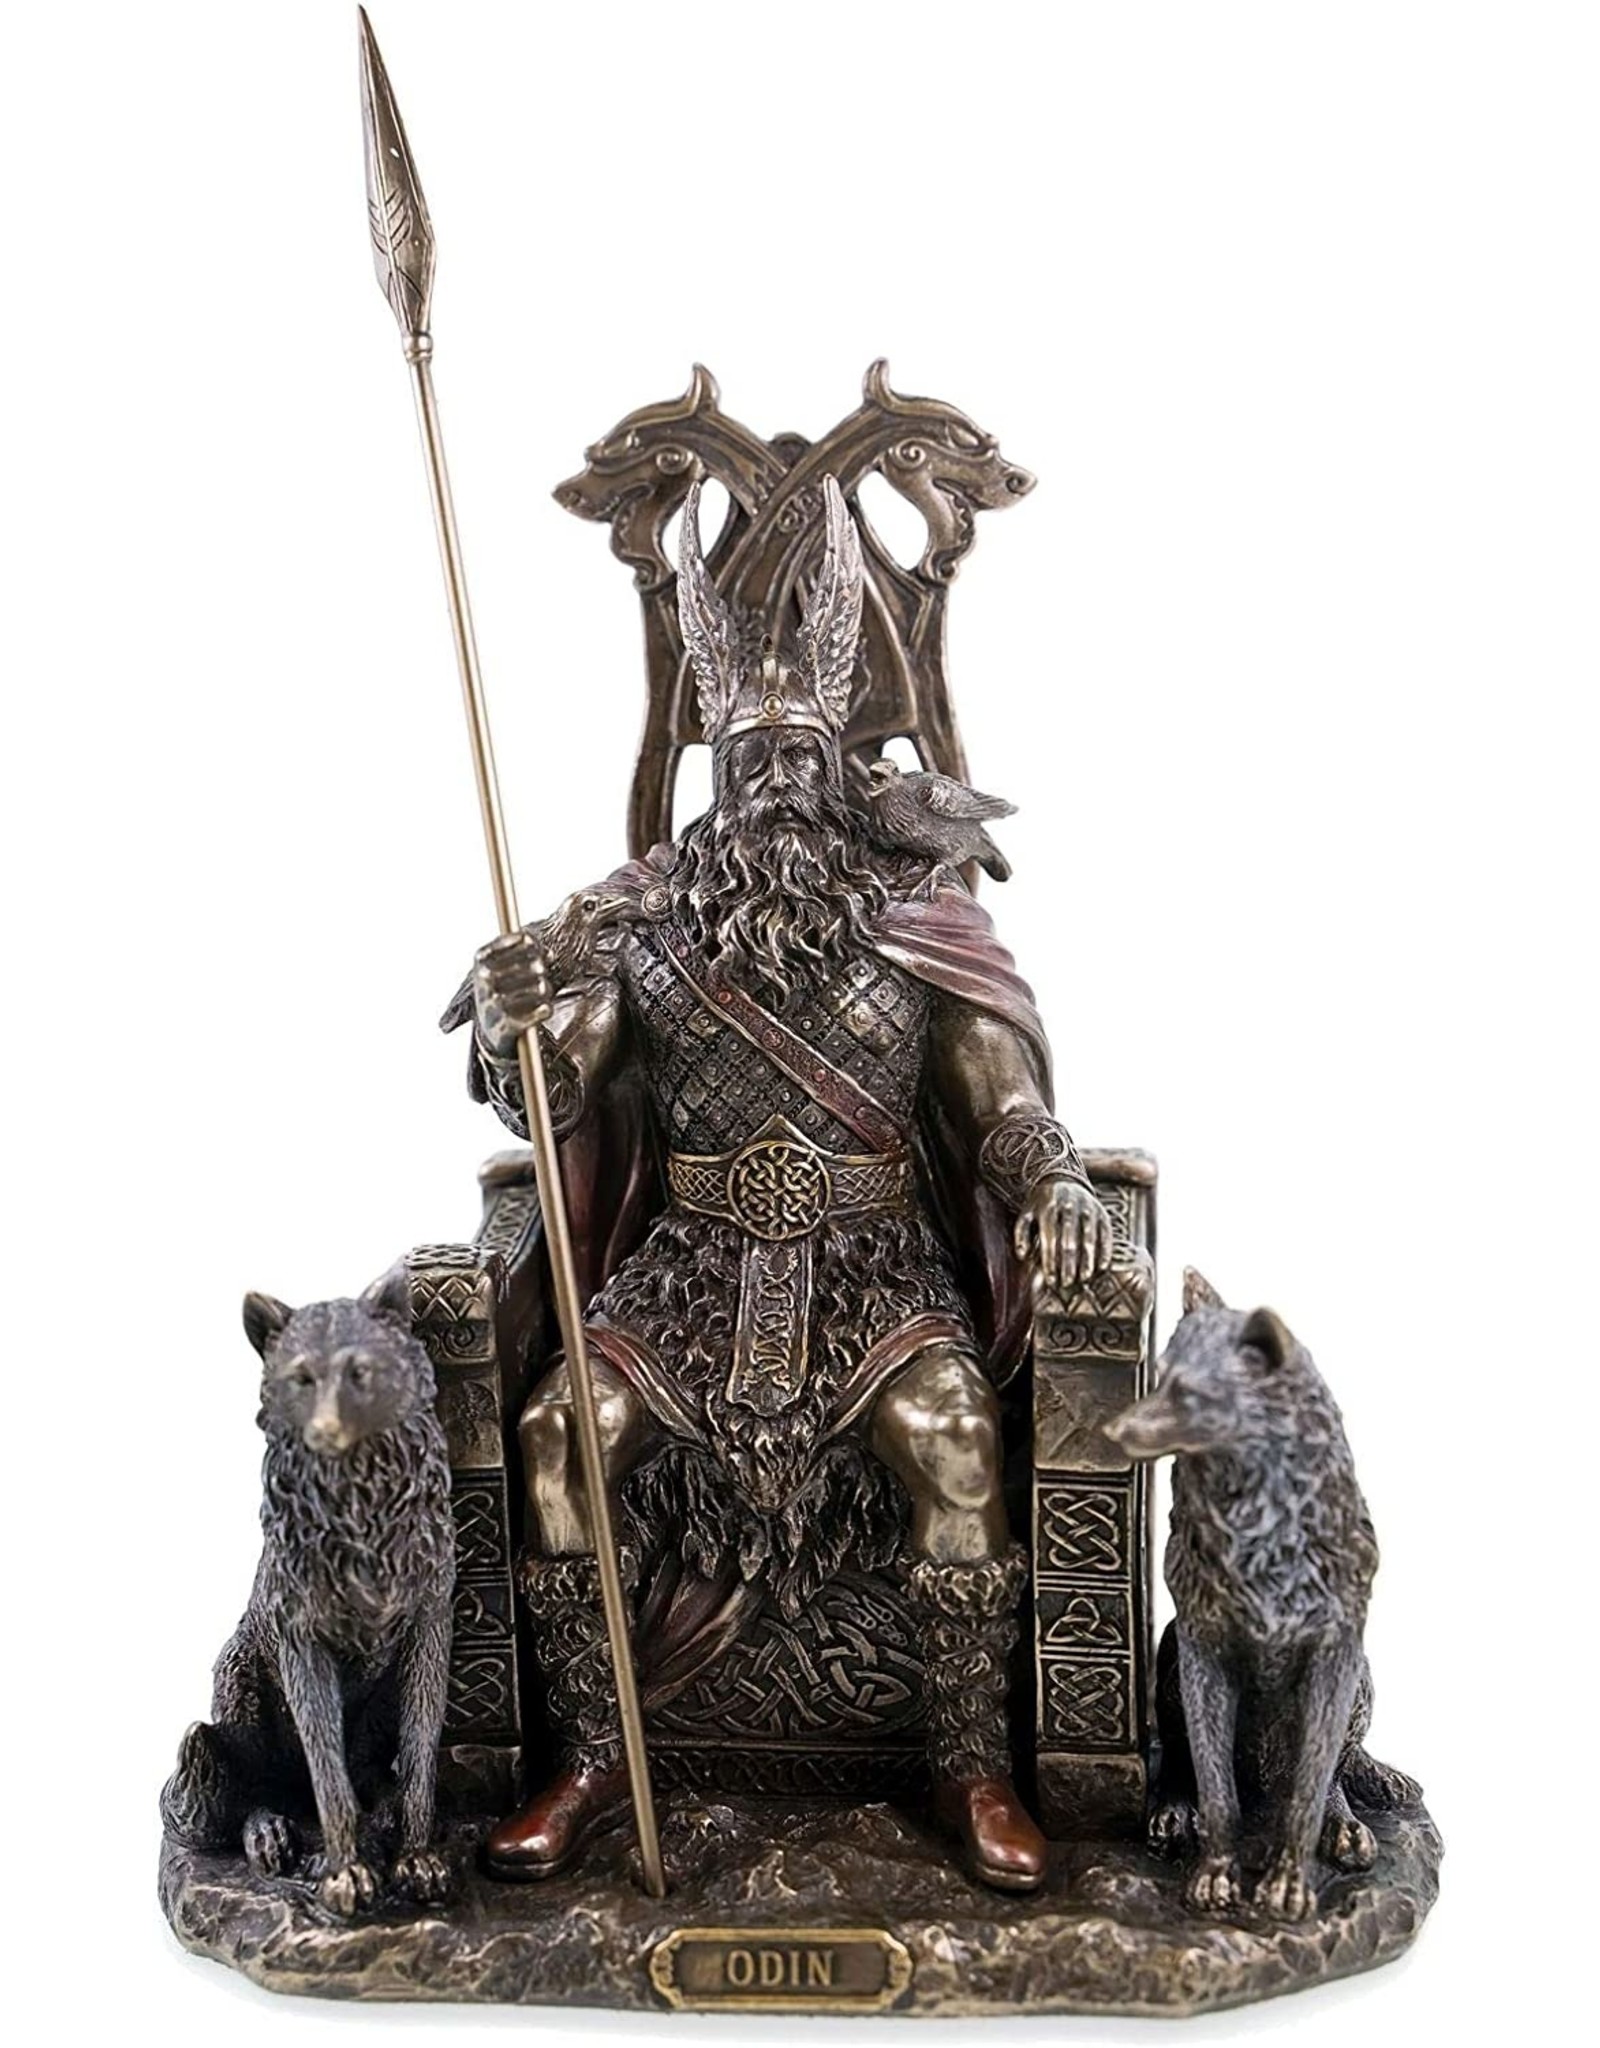 Veronese Design Giftware & Lifestyle - Odin with Wolves Sitting on the Throne Veronese Design